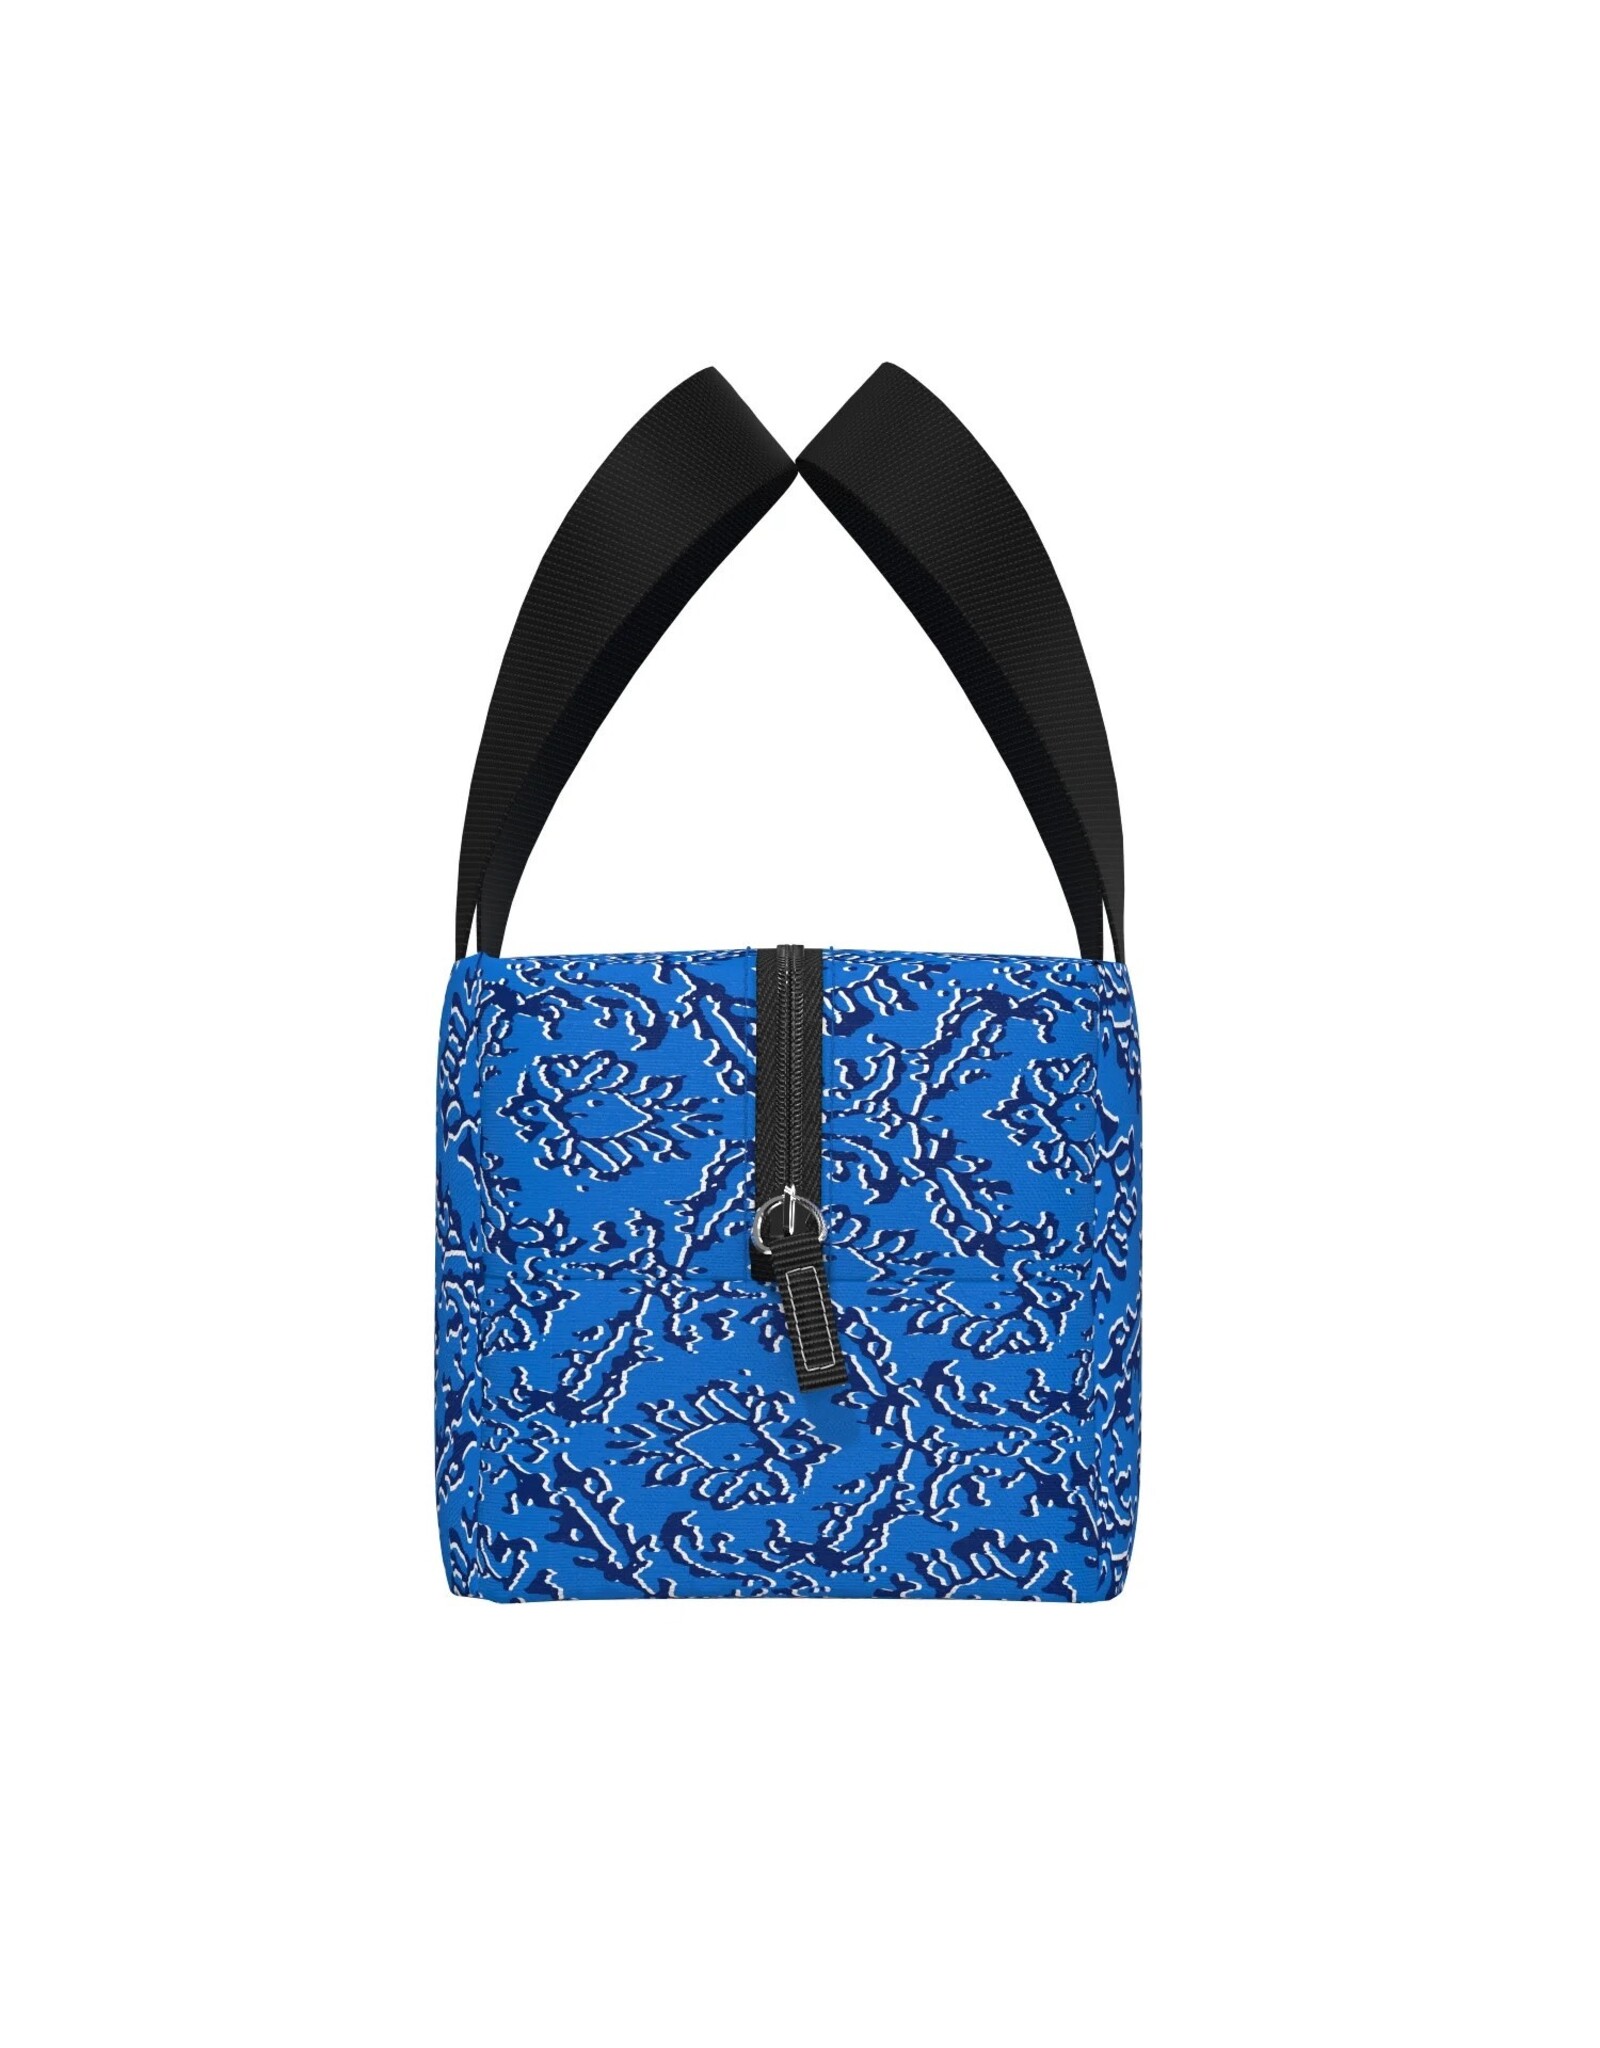 Scout Bags Gift N Go Zip Top Gift Bag In Line And Dandy Pattern